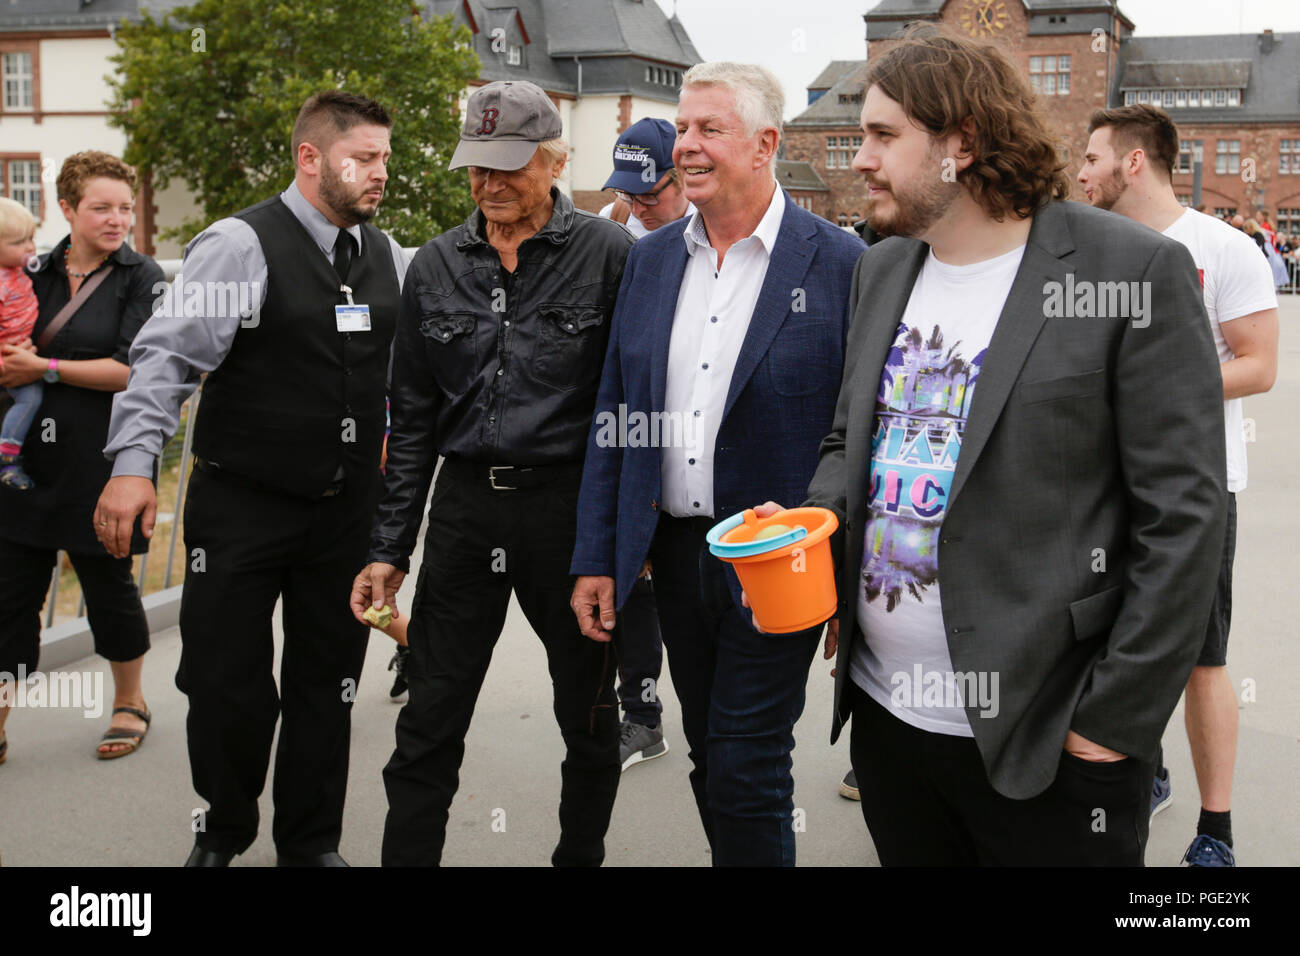 Worms, Germany. 24th Aug, 2018. Terence Hill (2nd left), the Lord Mayor of Worms Michael Kissel (2nd right) and actor Peter Englert (right), who initiated the renaming of the bridge to Terence-Hill-Bridge, walk over the bridge. Italian actor Terence Hill visited the German city of Worms, to present his new movie (My Name is somebody). Terence Hill added the stop in Worms to his movie promotion tour in Germany, to visit a pedestrian bridge, that is unofficially named Terence-Hill-Bridge (officially Karl-Kubel-Bridge). Credit: Michael Debets/Pacific Press/Alamy Live News Stock Photo